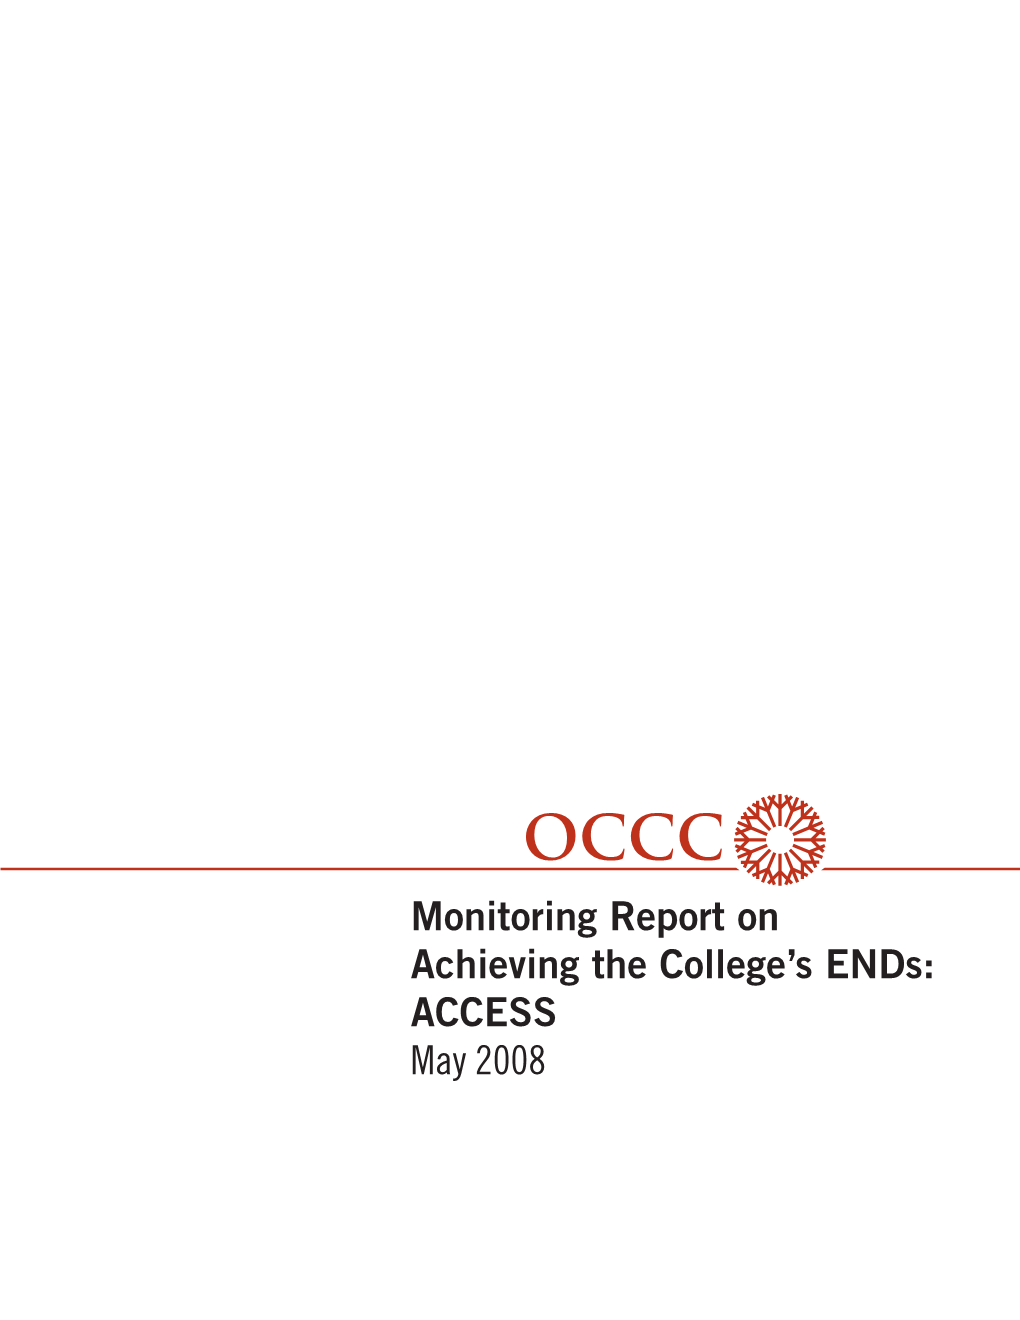 Monitoring Report on Achieving the College's Ends: ACCESS May 2008